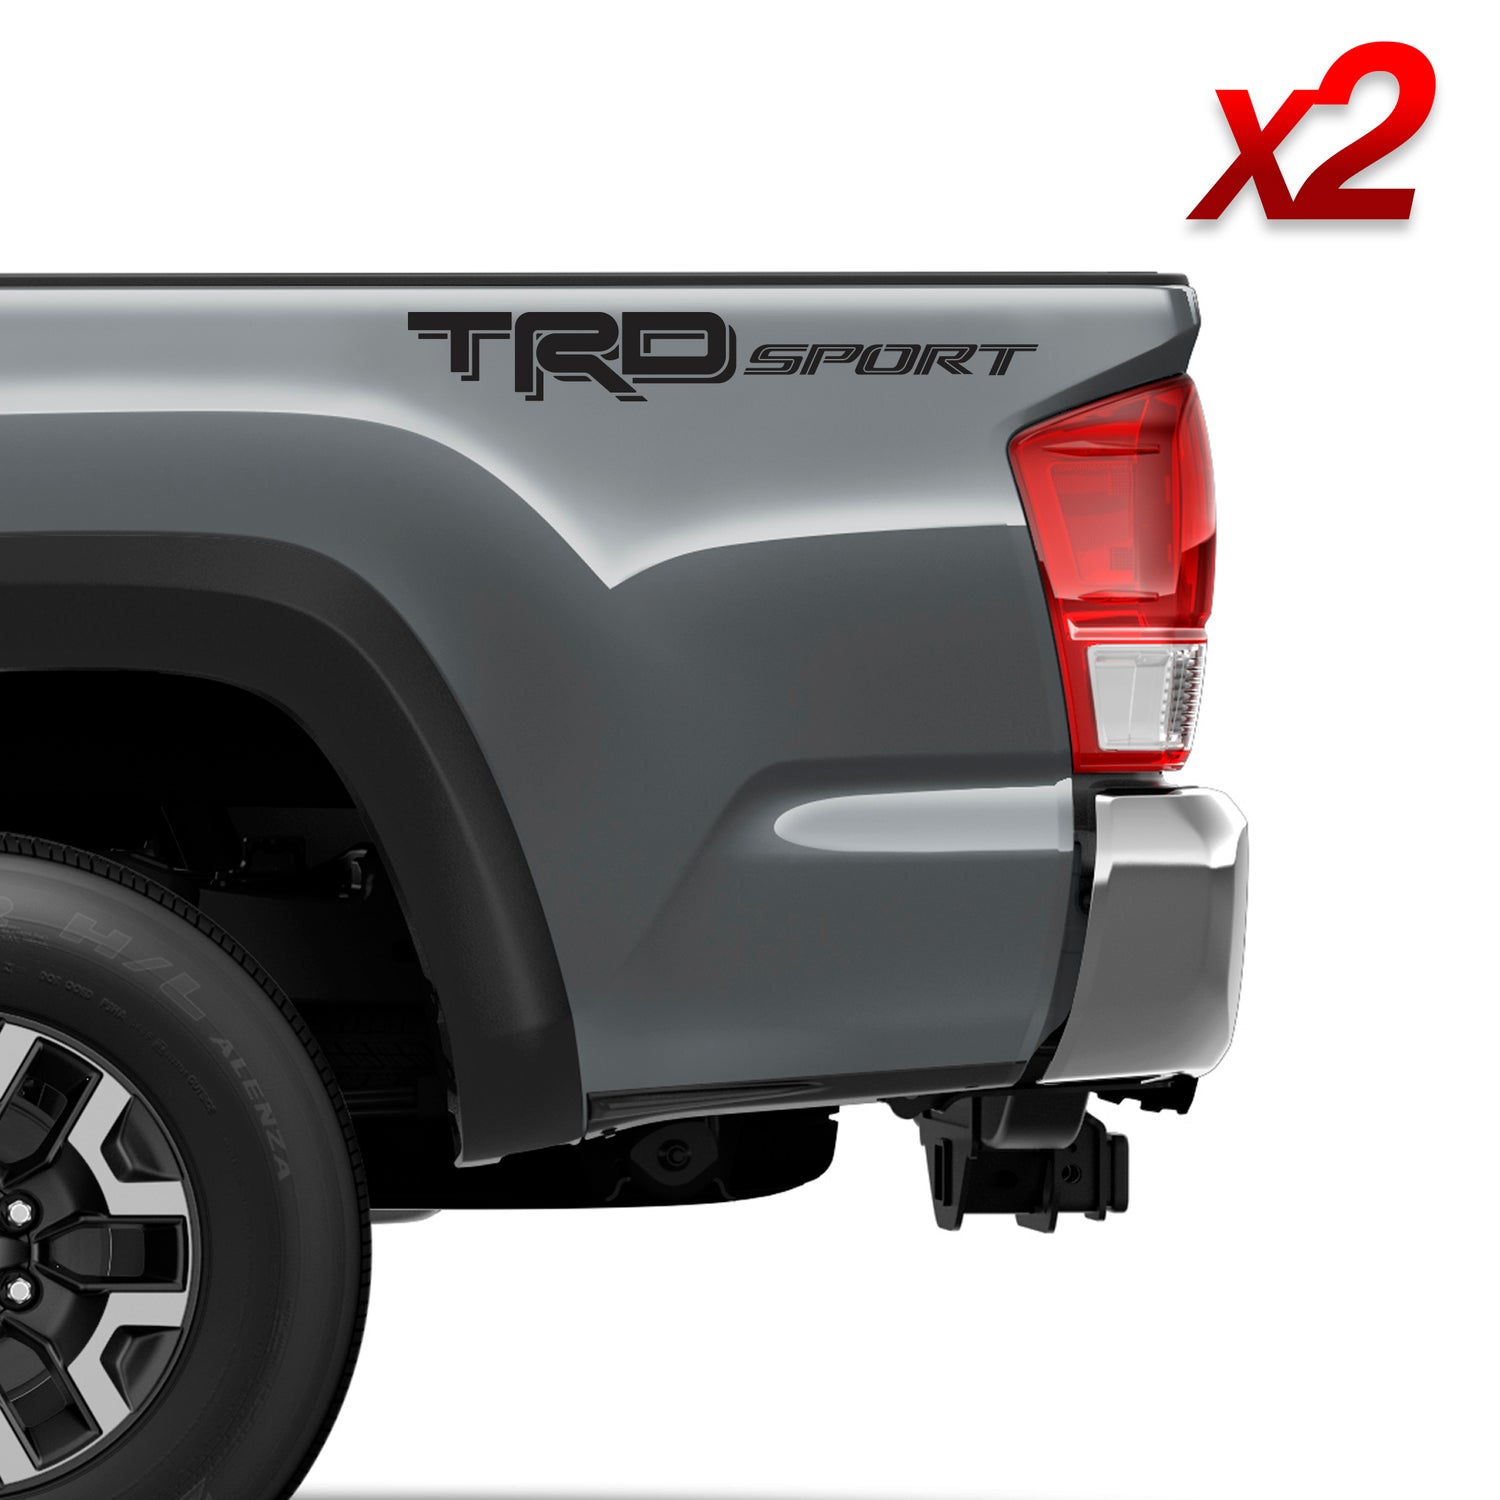 Set of 2: TRD Sport vinyl decal for 2016-2020 Toyota Tacoma Tundra - US Rallystripes